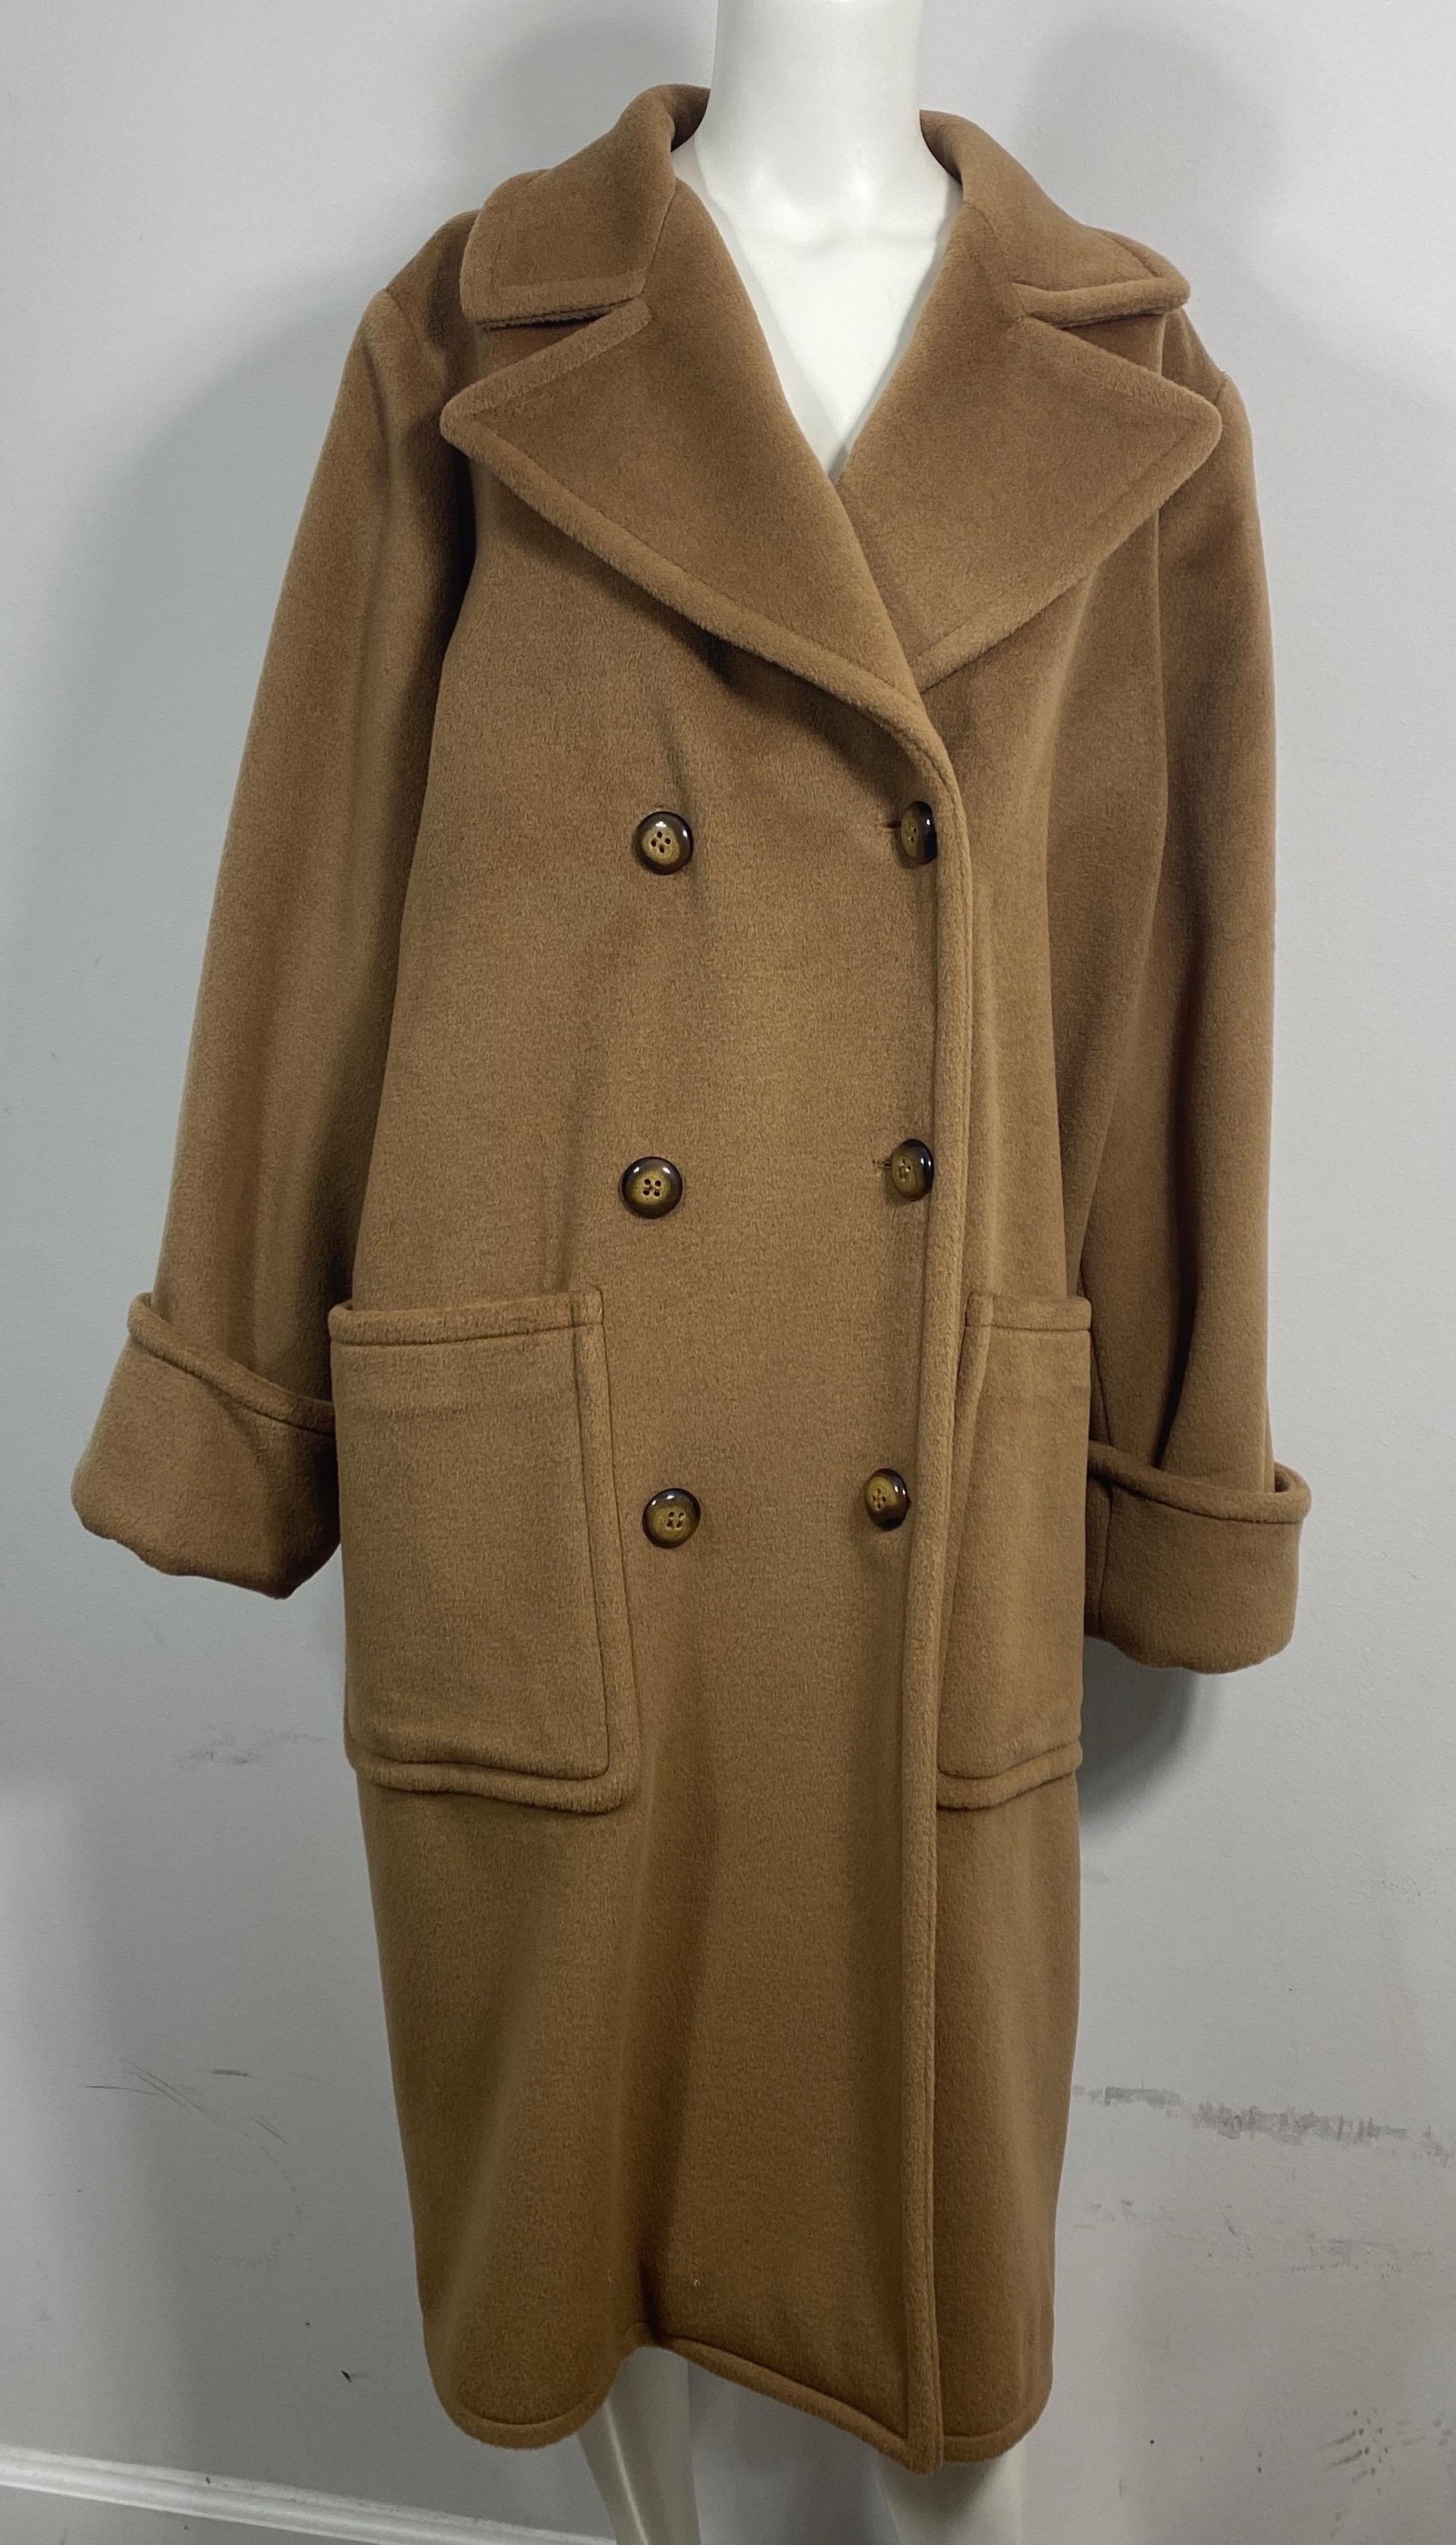 Valentino Boutique 1990’s Tan Cashmere and Wool Oversized Coat - Size 10  This fully lined fantastic 90’s double breasted cashmere coat is perfect for todays 90’s oversized fashion trend, it is made of a very soft cashmere/wool blend , has 6 front